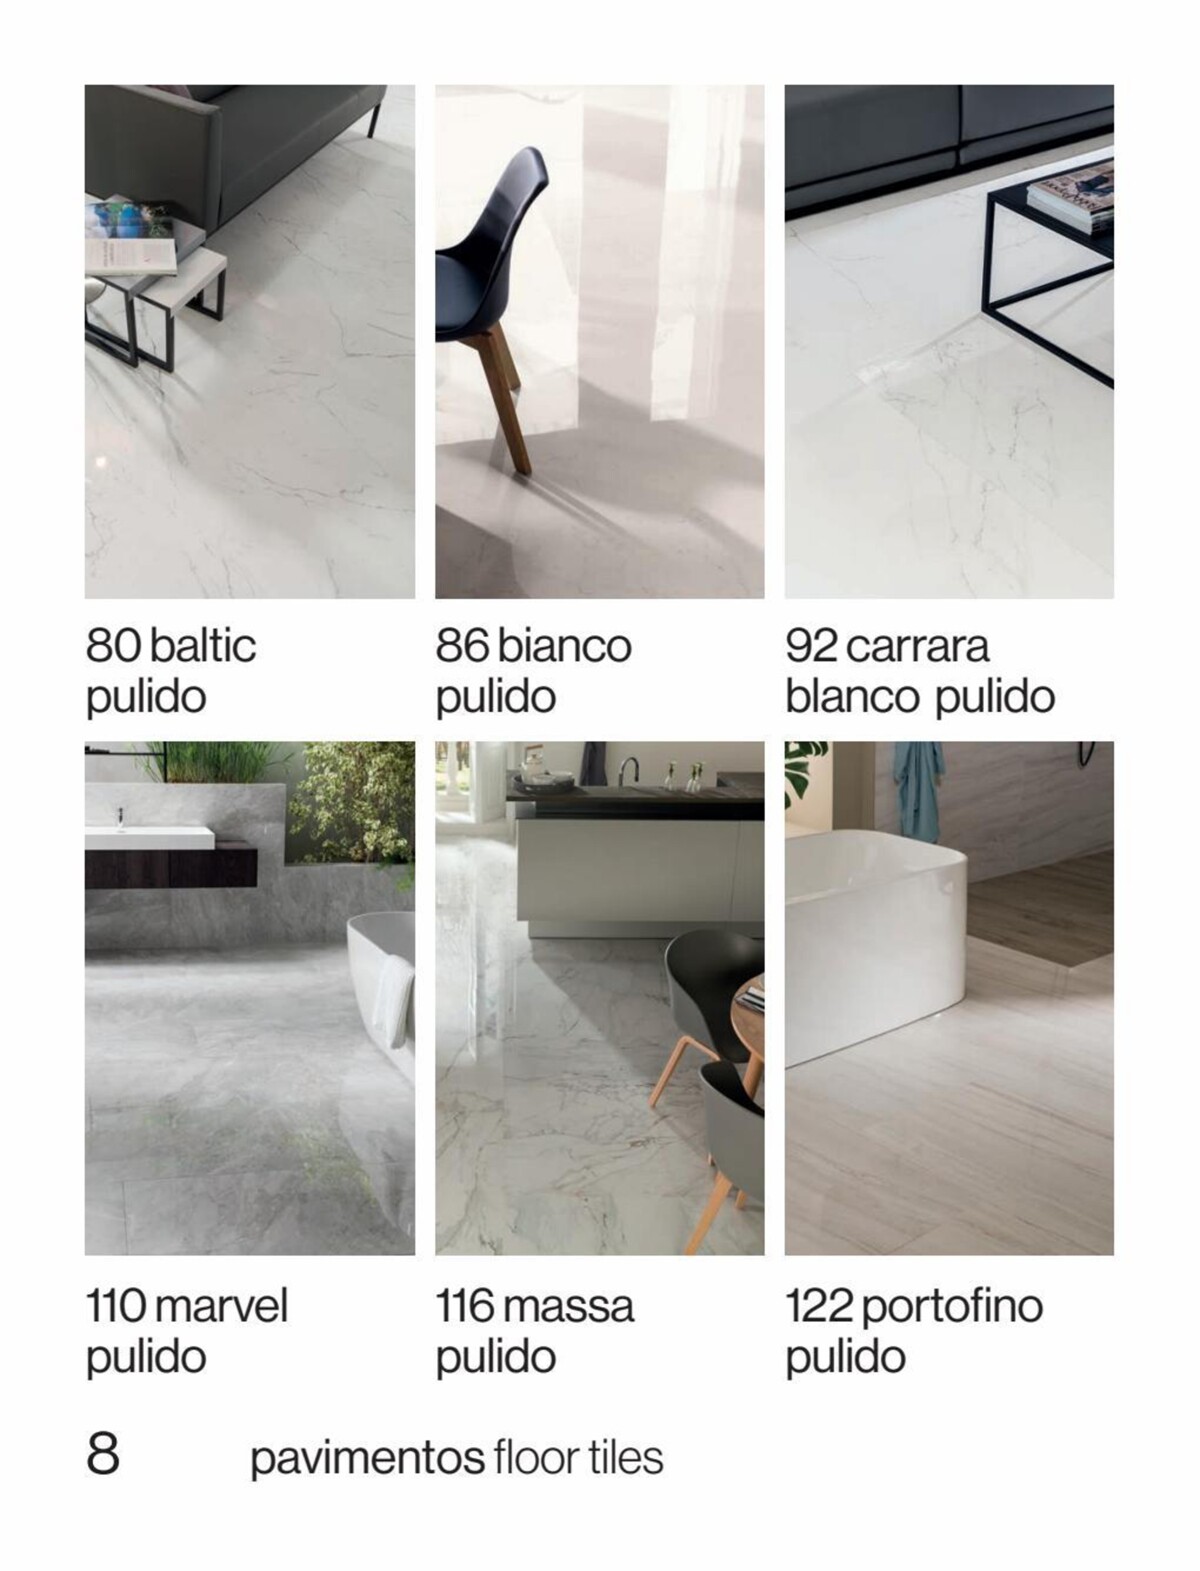 Catalogue MARMI,a ceramic tile that echoes the purity of marble, page 00008